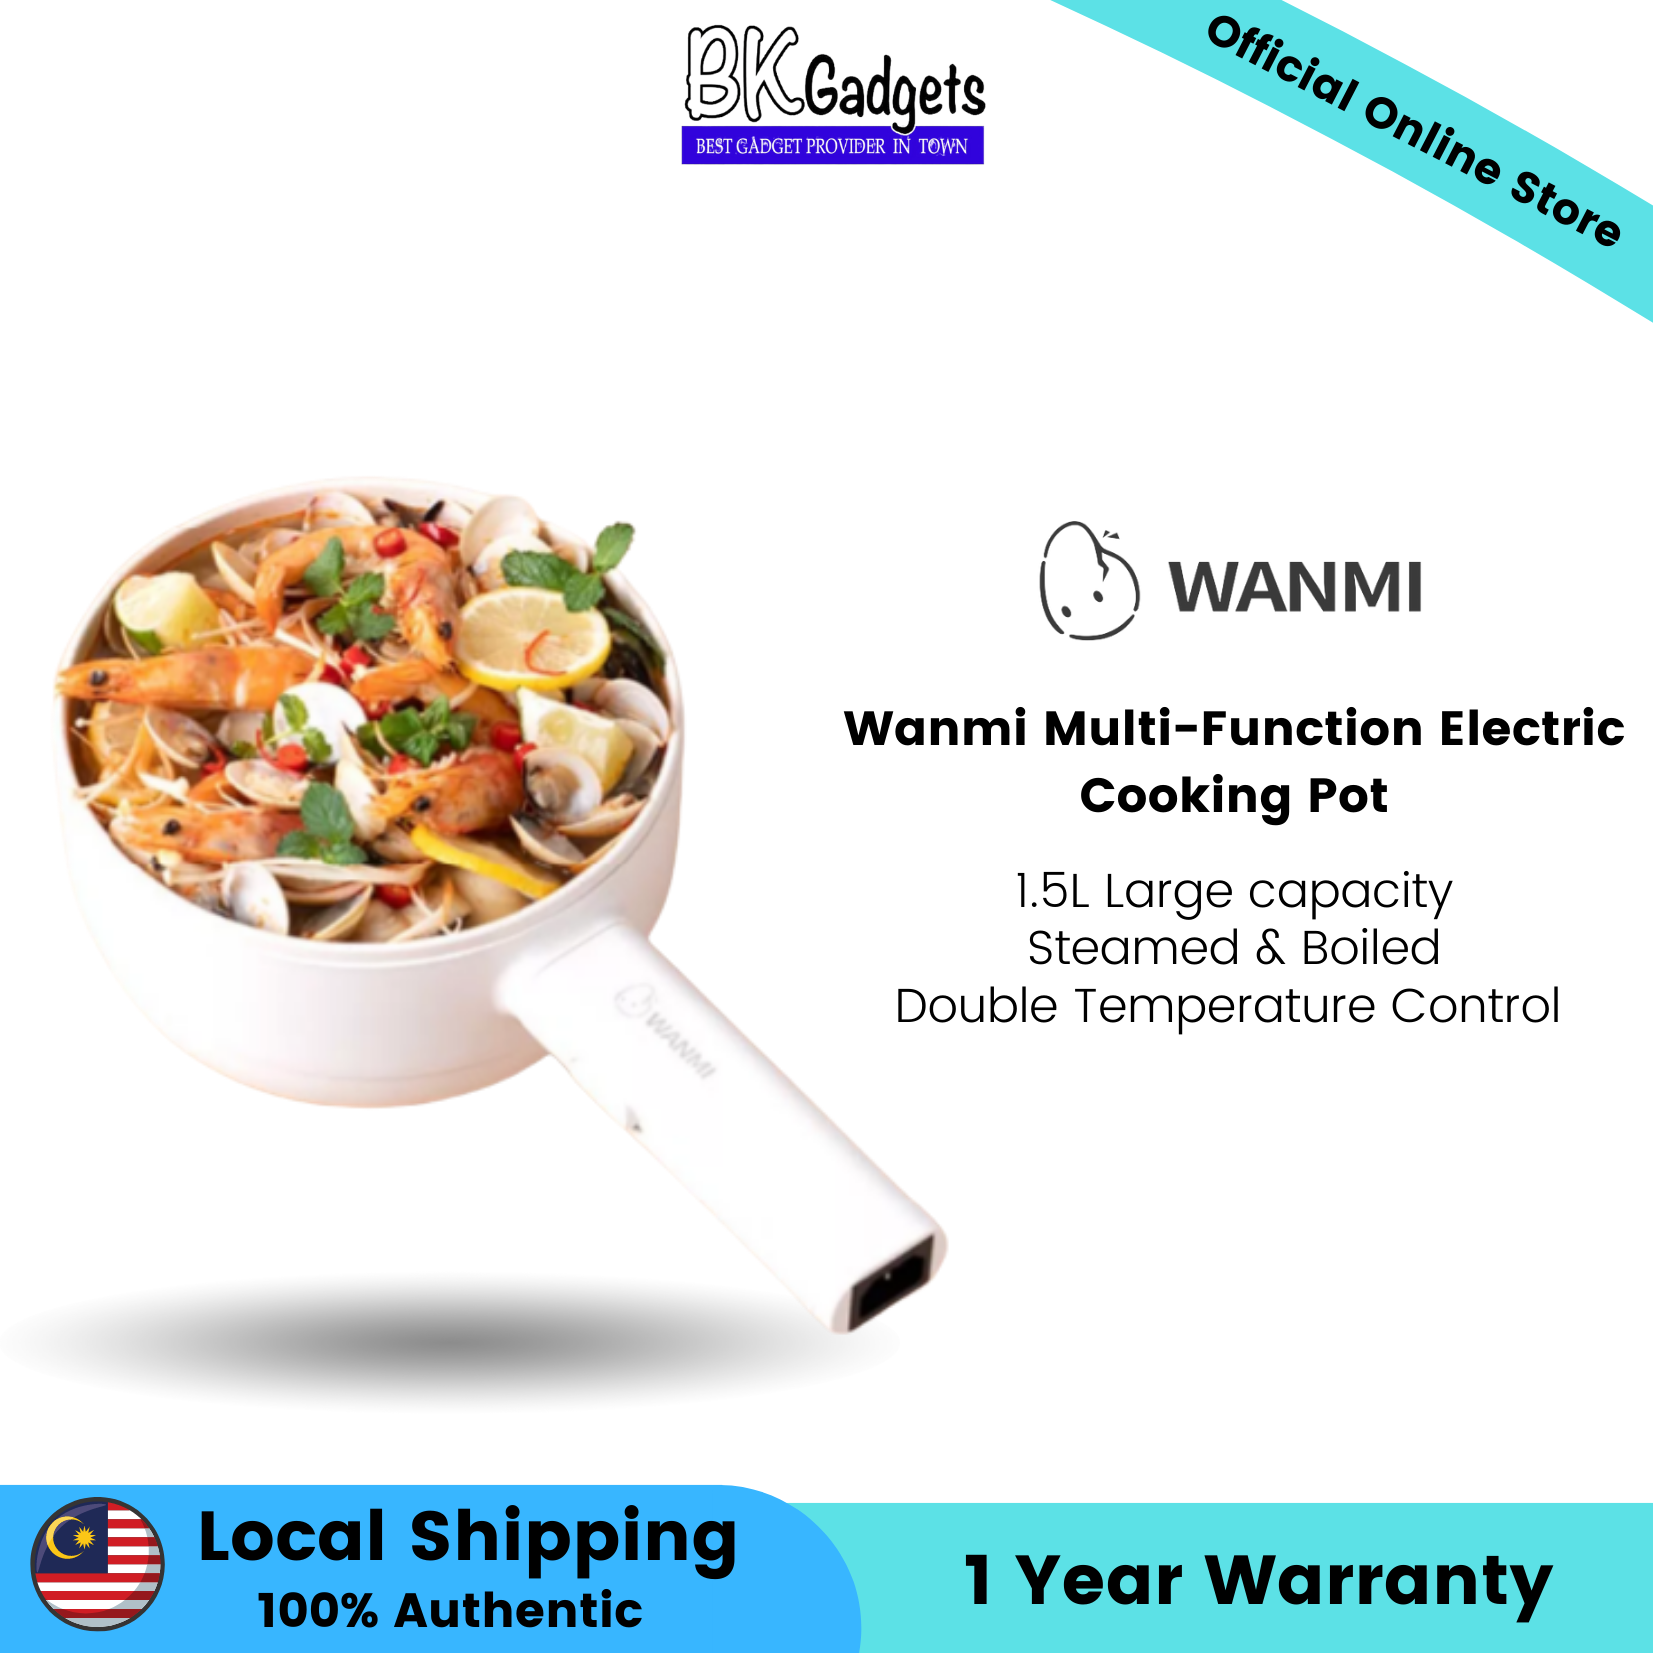 Wanmi Multi-Function Electric Cooking Pot | 1.5L Large Capacity | Steamed & Boiled (Steamer Included) | Double Temperature Control